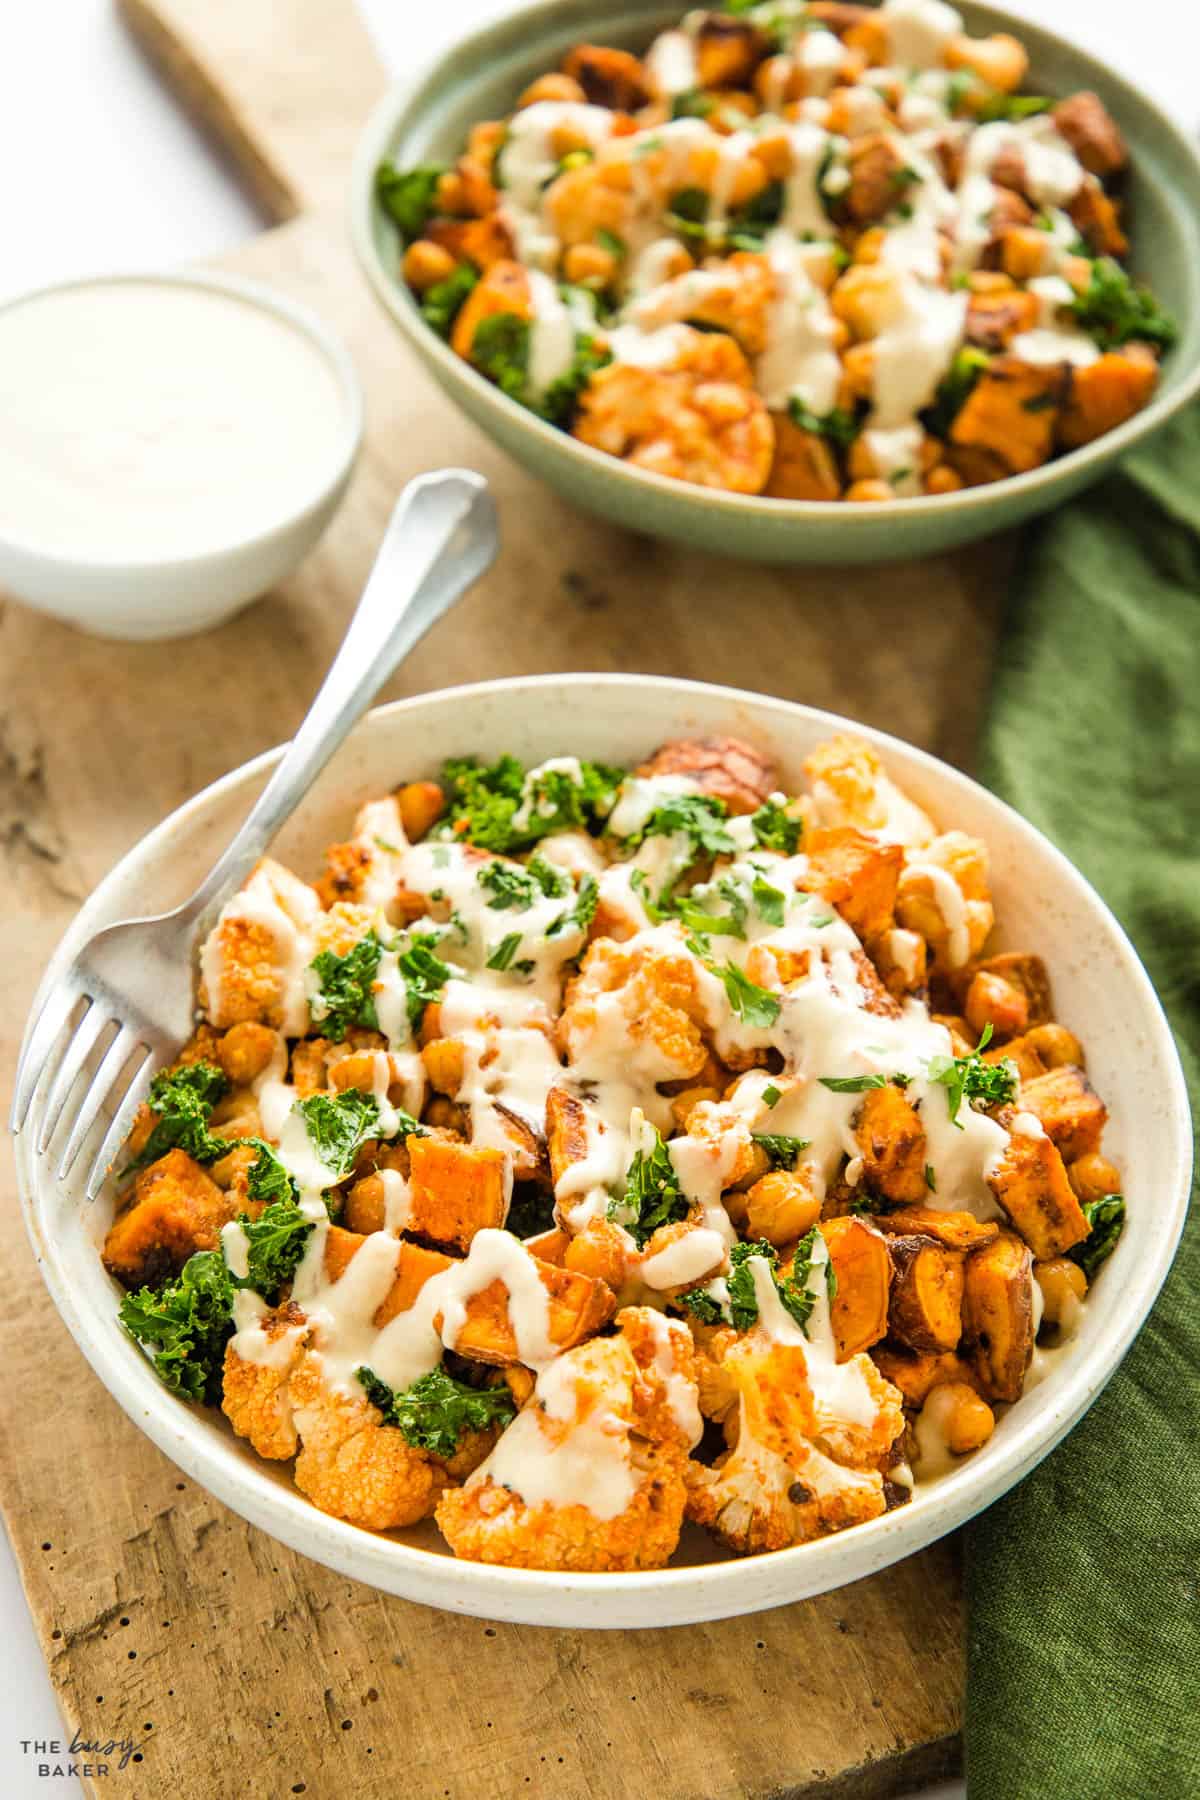 cauliflower with kale, sweet potatoes and chickpeas